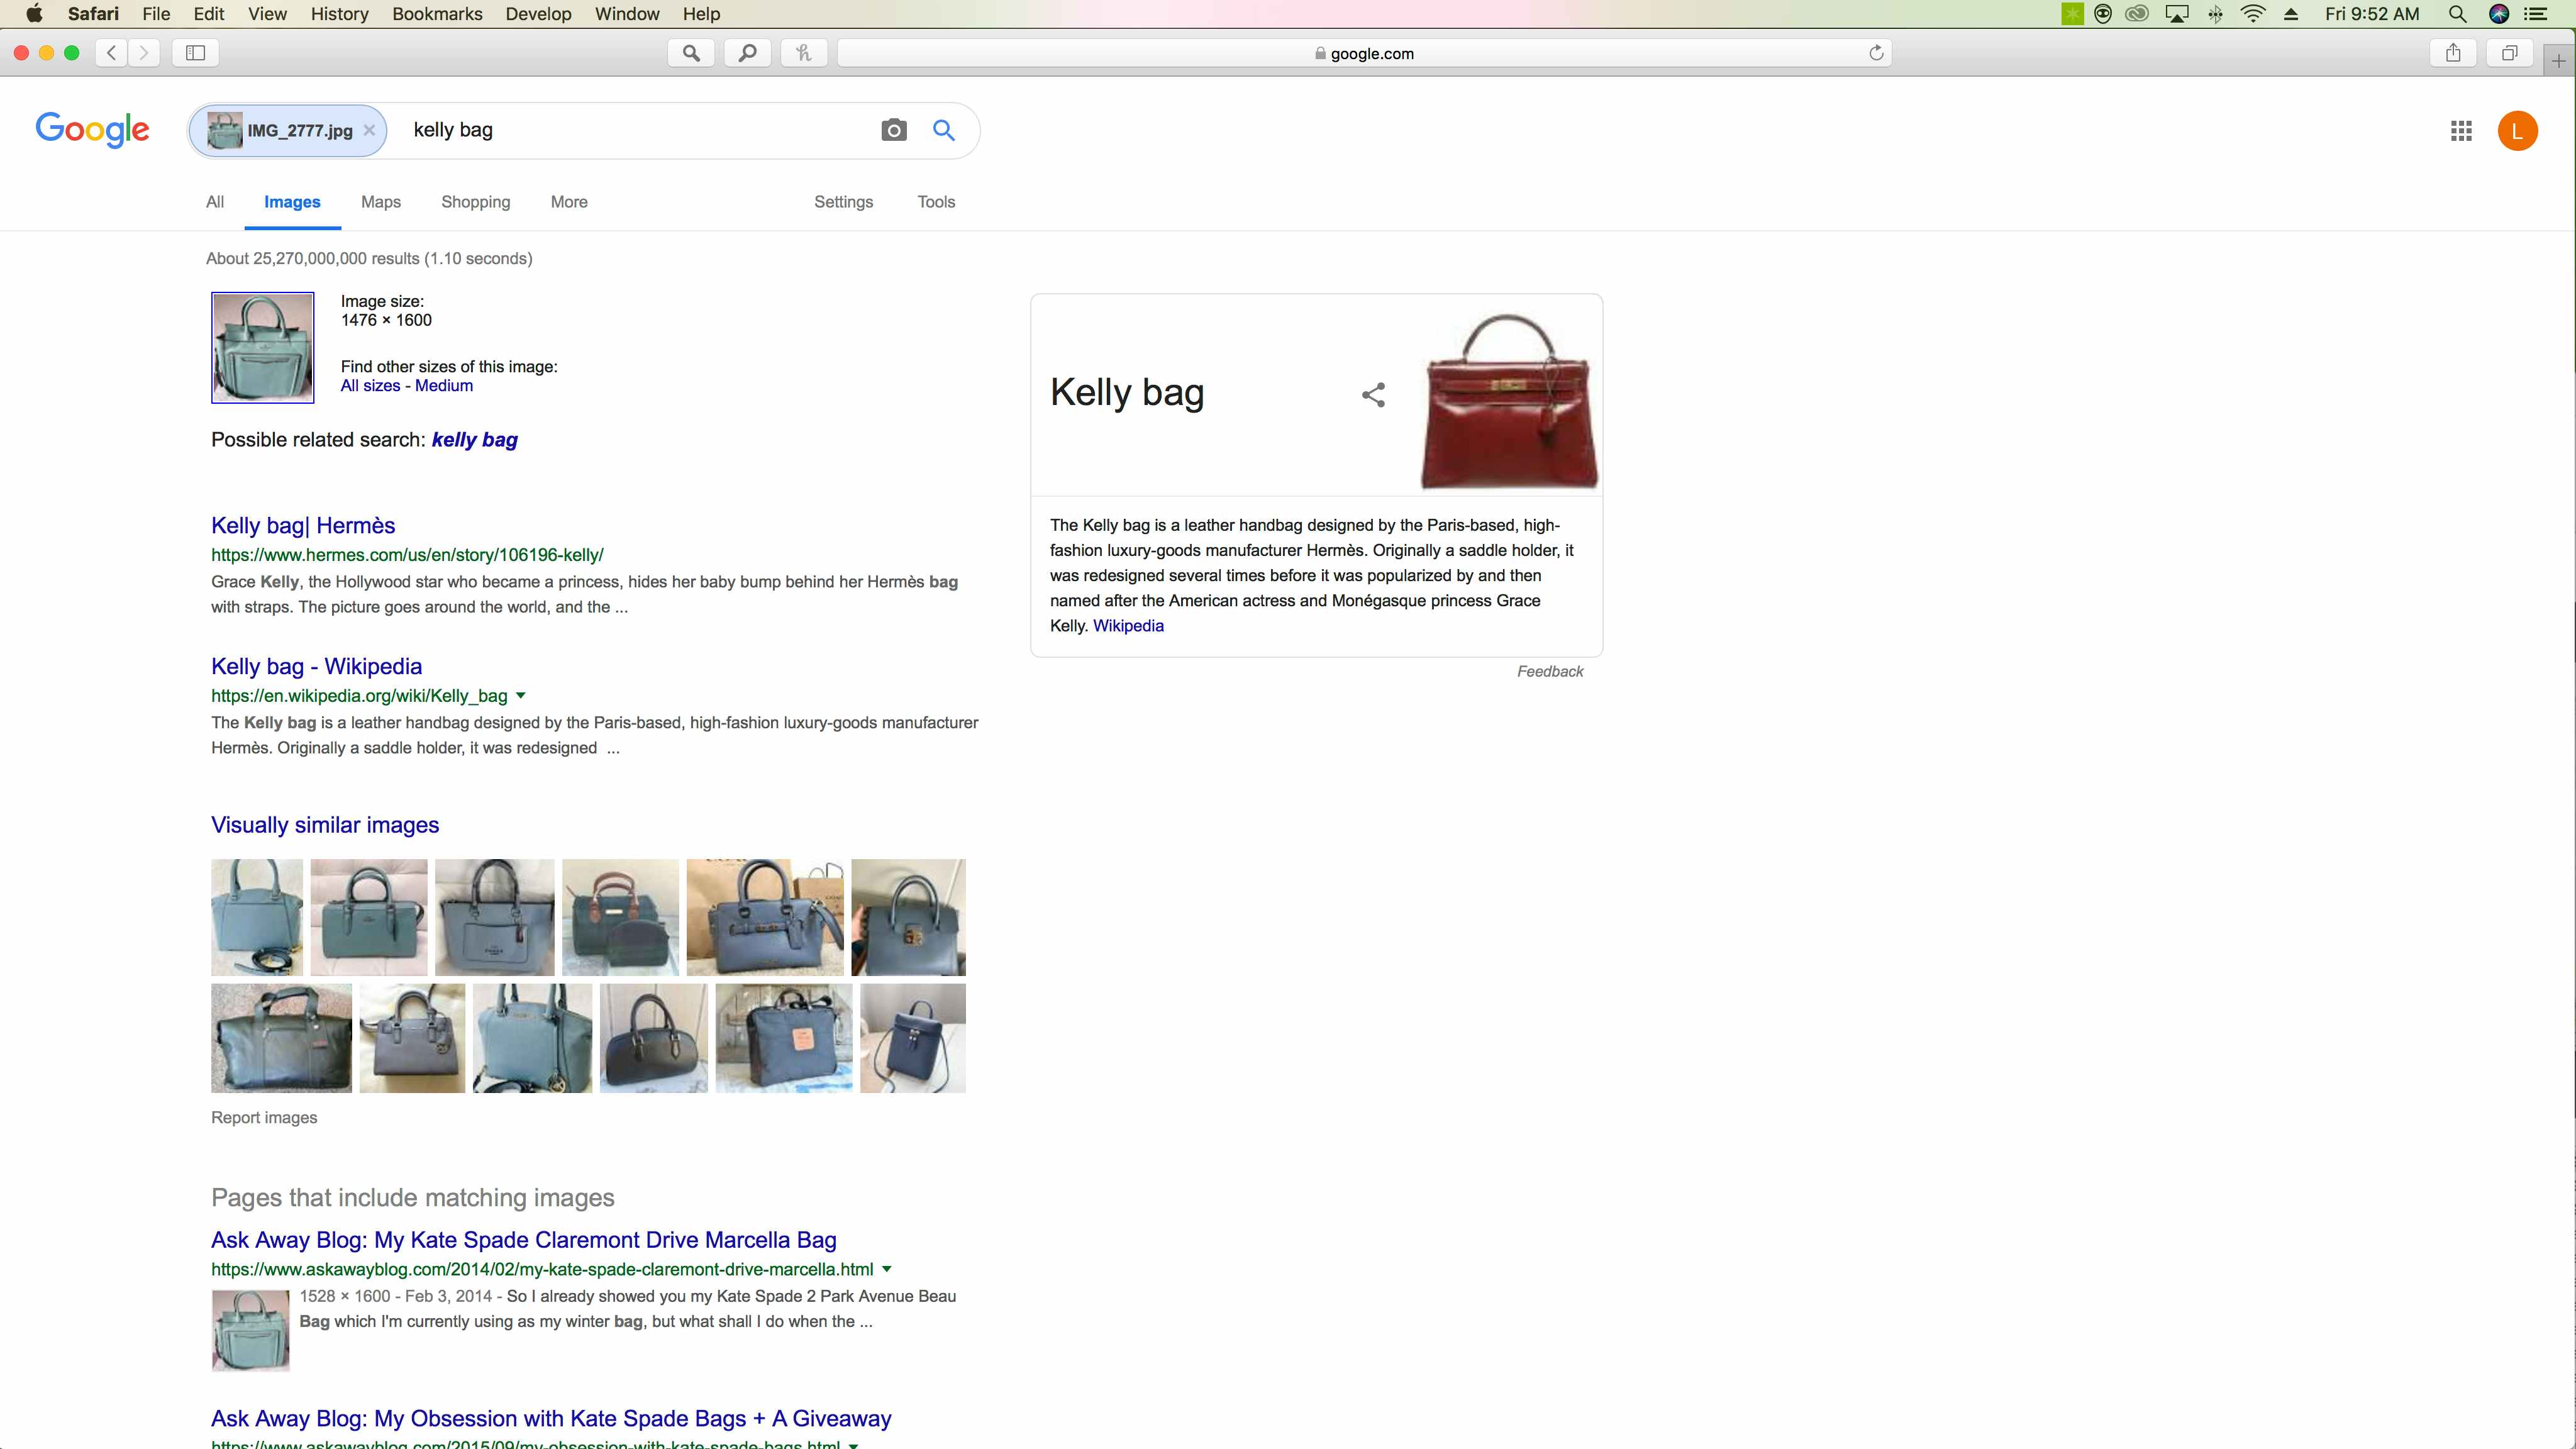 Right click the image of an item you want to buy and do a Google image search to find it cheaper.